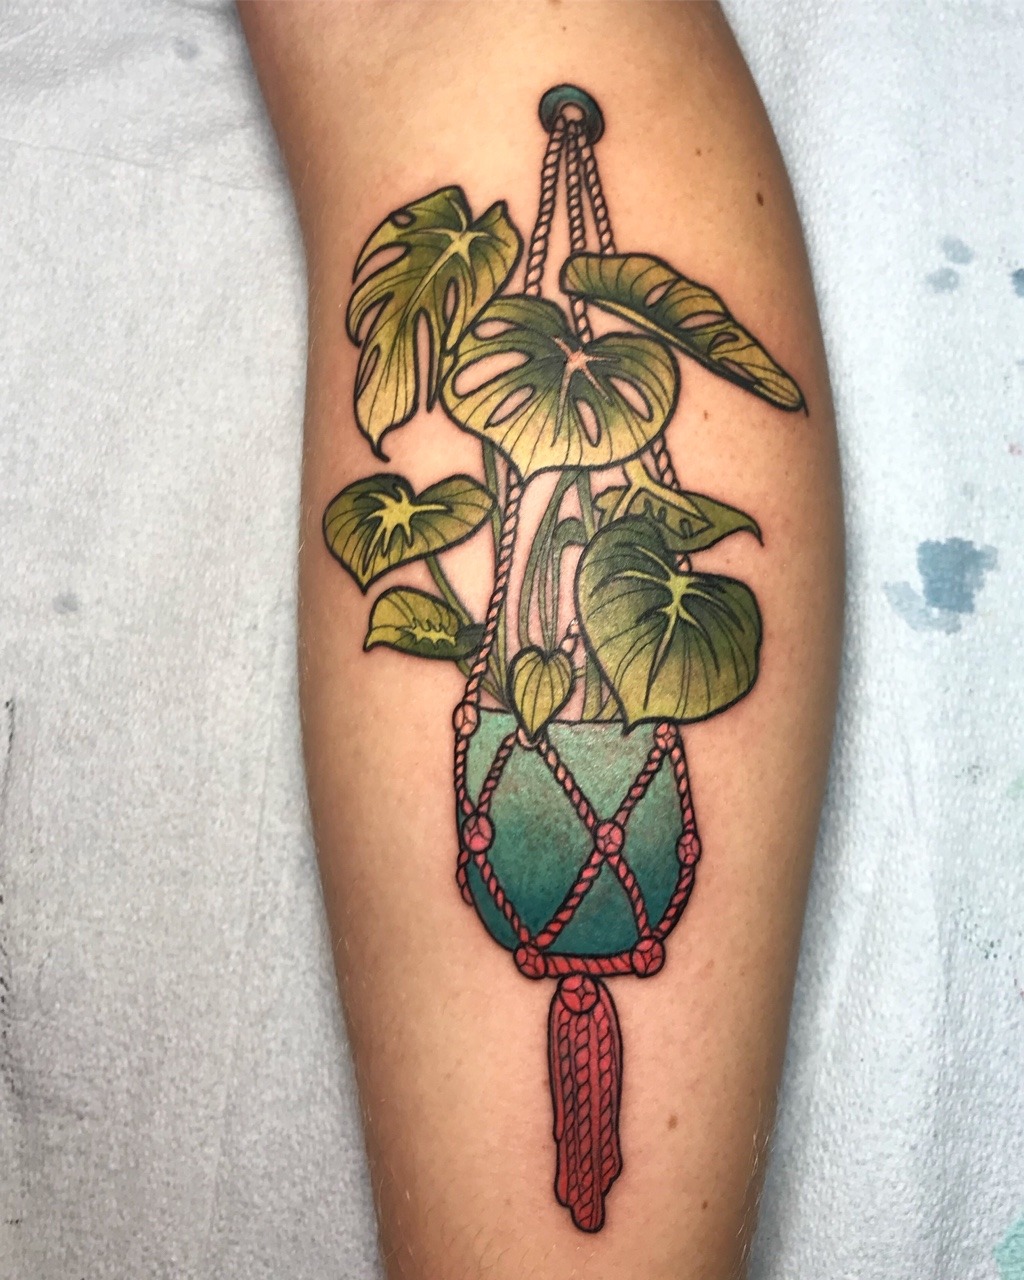 Tattoo uploaded by Expression Tattoo  Art  Hanging basket by Katie Dunn   Tattoodo